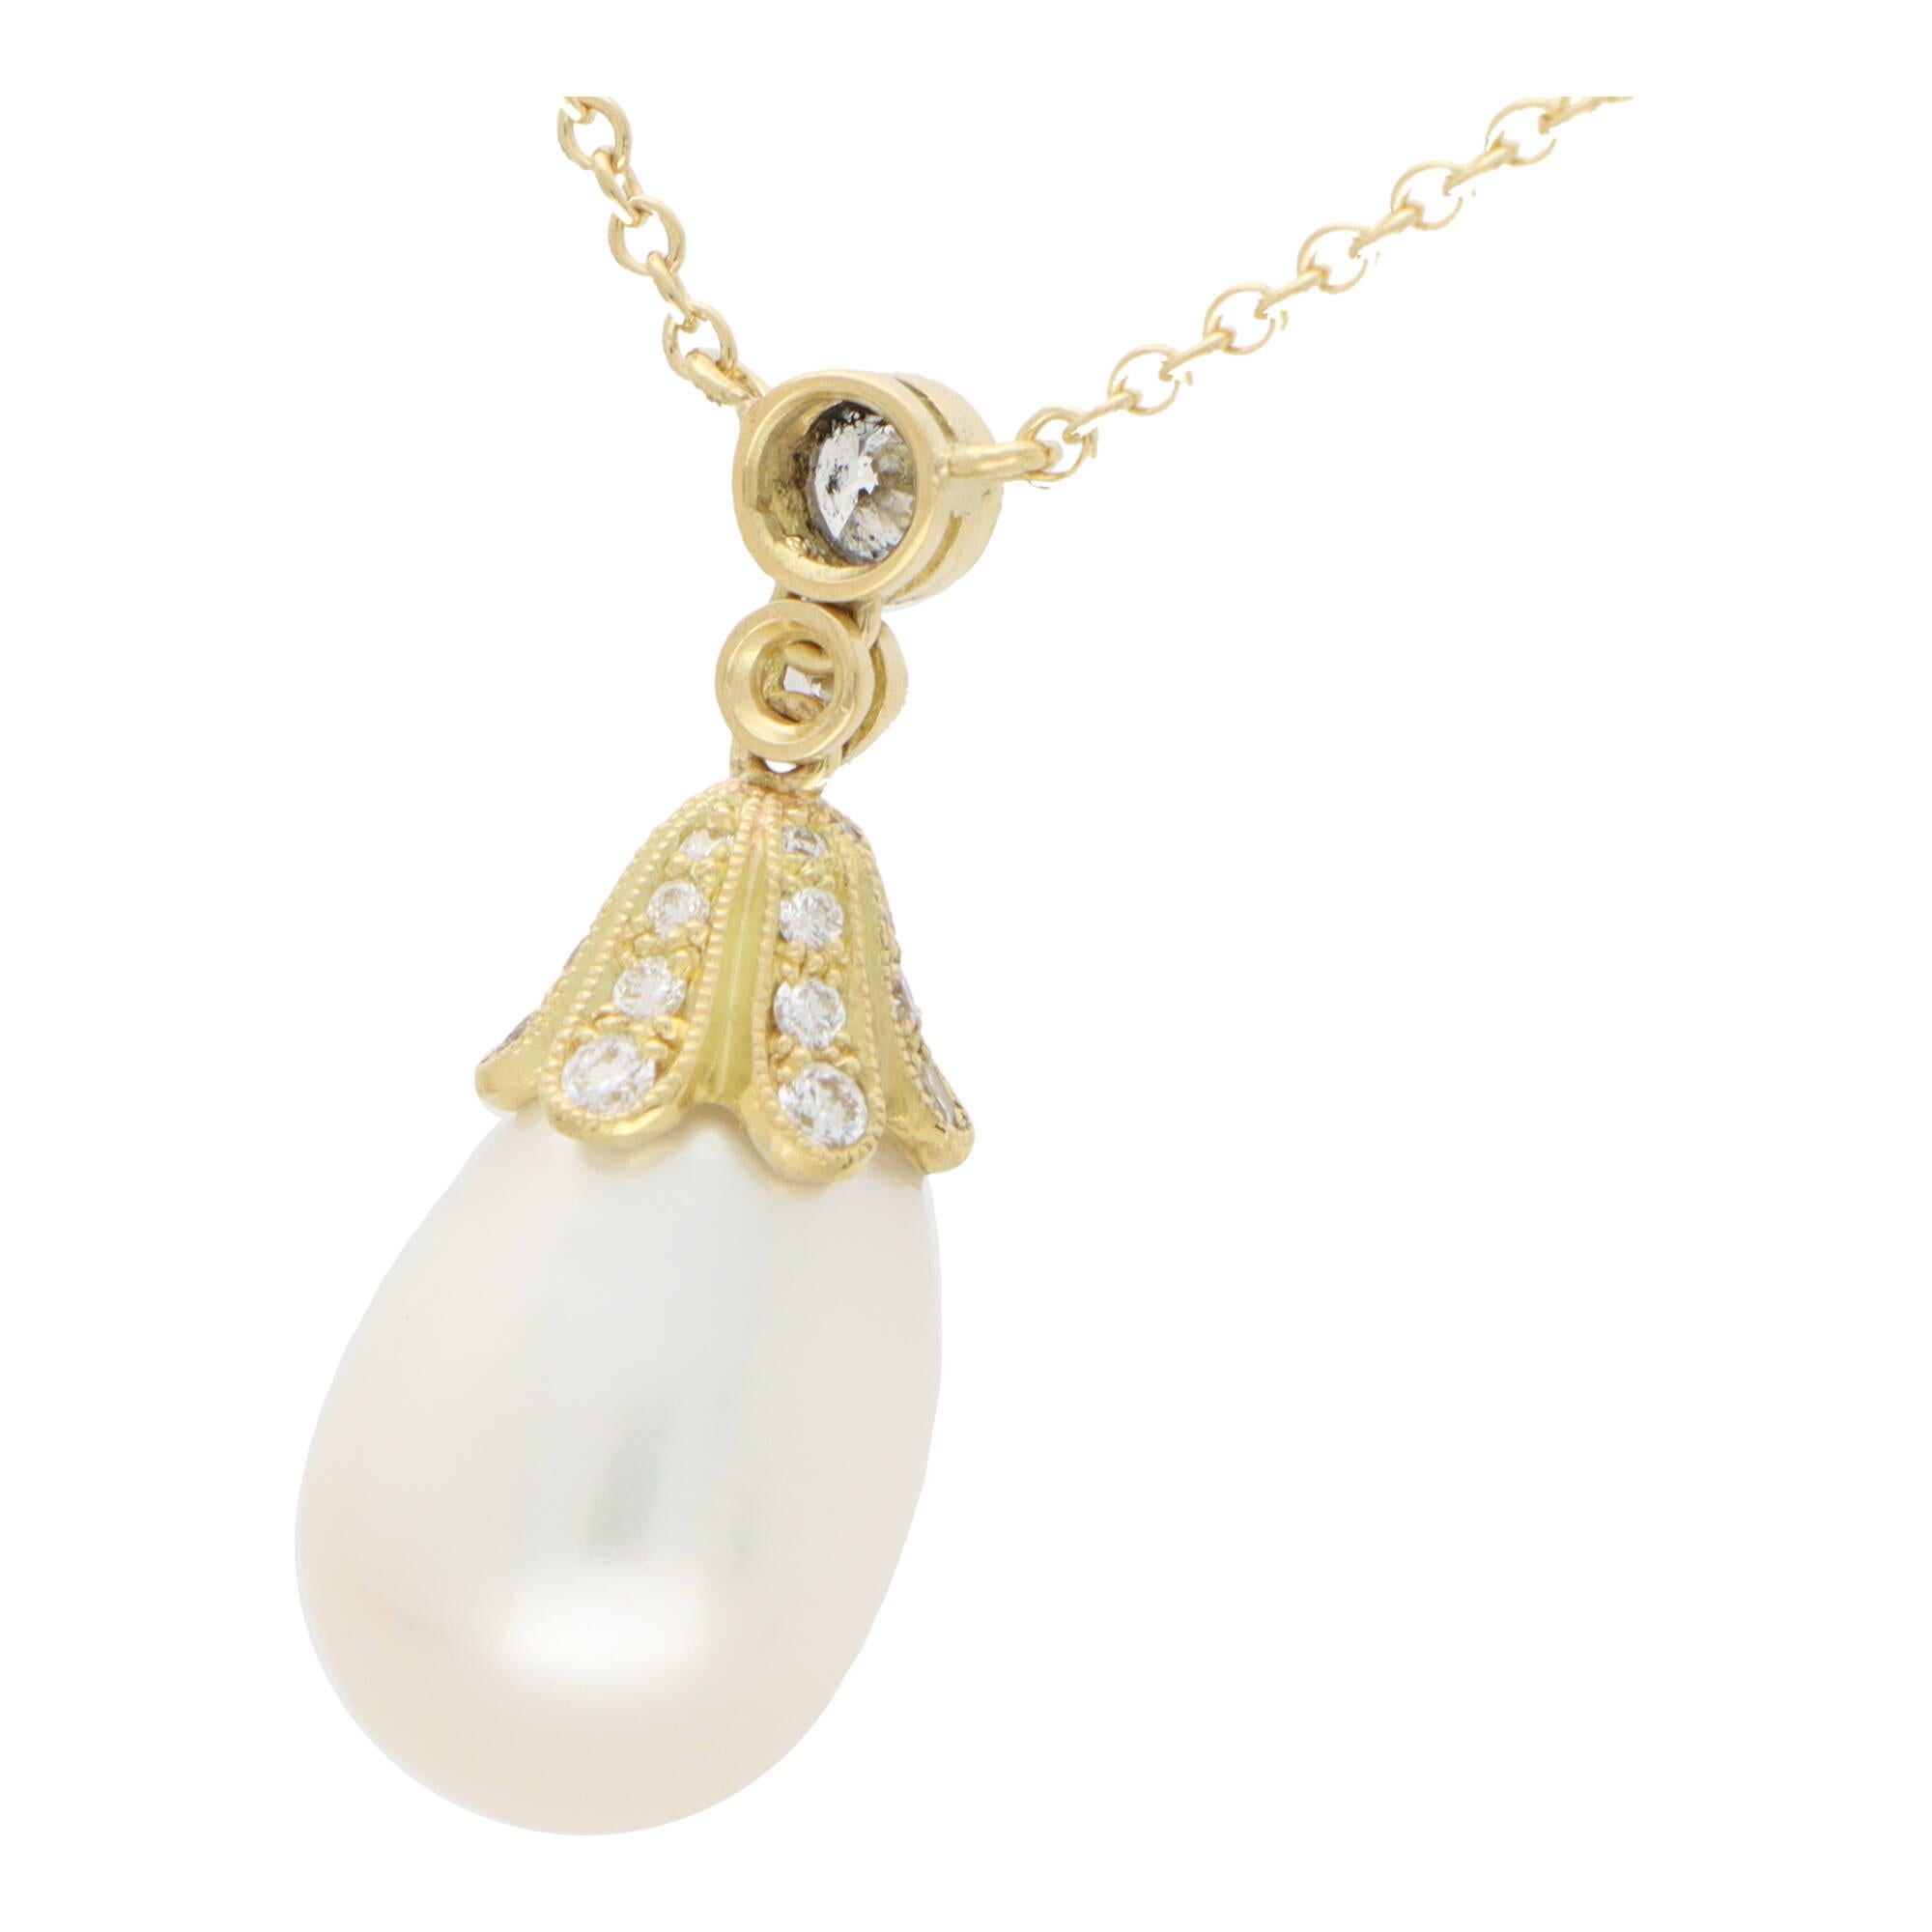 A fabulous pearl and diamond pendant necklace set in 18k yellow gold.

The pendant prominently features a 10 x 12-millimetre tear drop shaped pearl that elegantly hangs from a diamond set cap and diamond bail. The pendant currently hangs from a